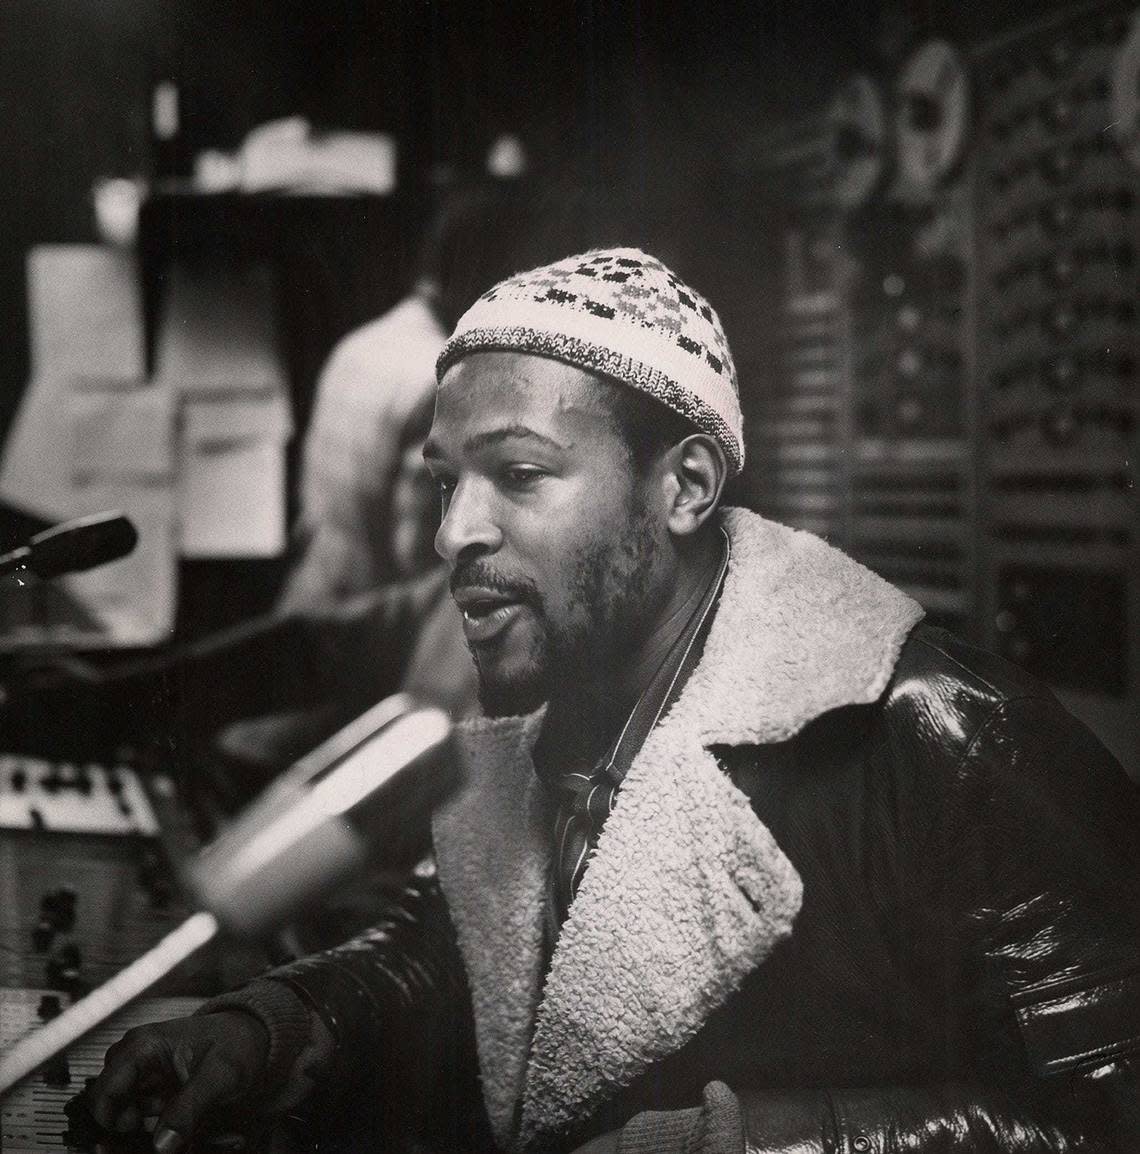 Marvin Gaye, photographed in the Motown studio console room in early 1971 by Gordon Staples, concertmaster of the Detroit Symphony Orchestra. Gaye was recording his landmark ‘What’s Going On’ album. The Knight Foundation is funding digitization of these sessions for the Motown Museum in Detroit.